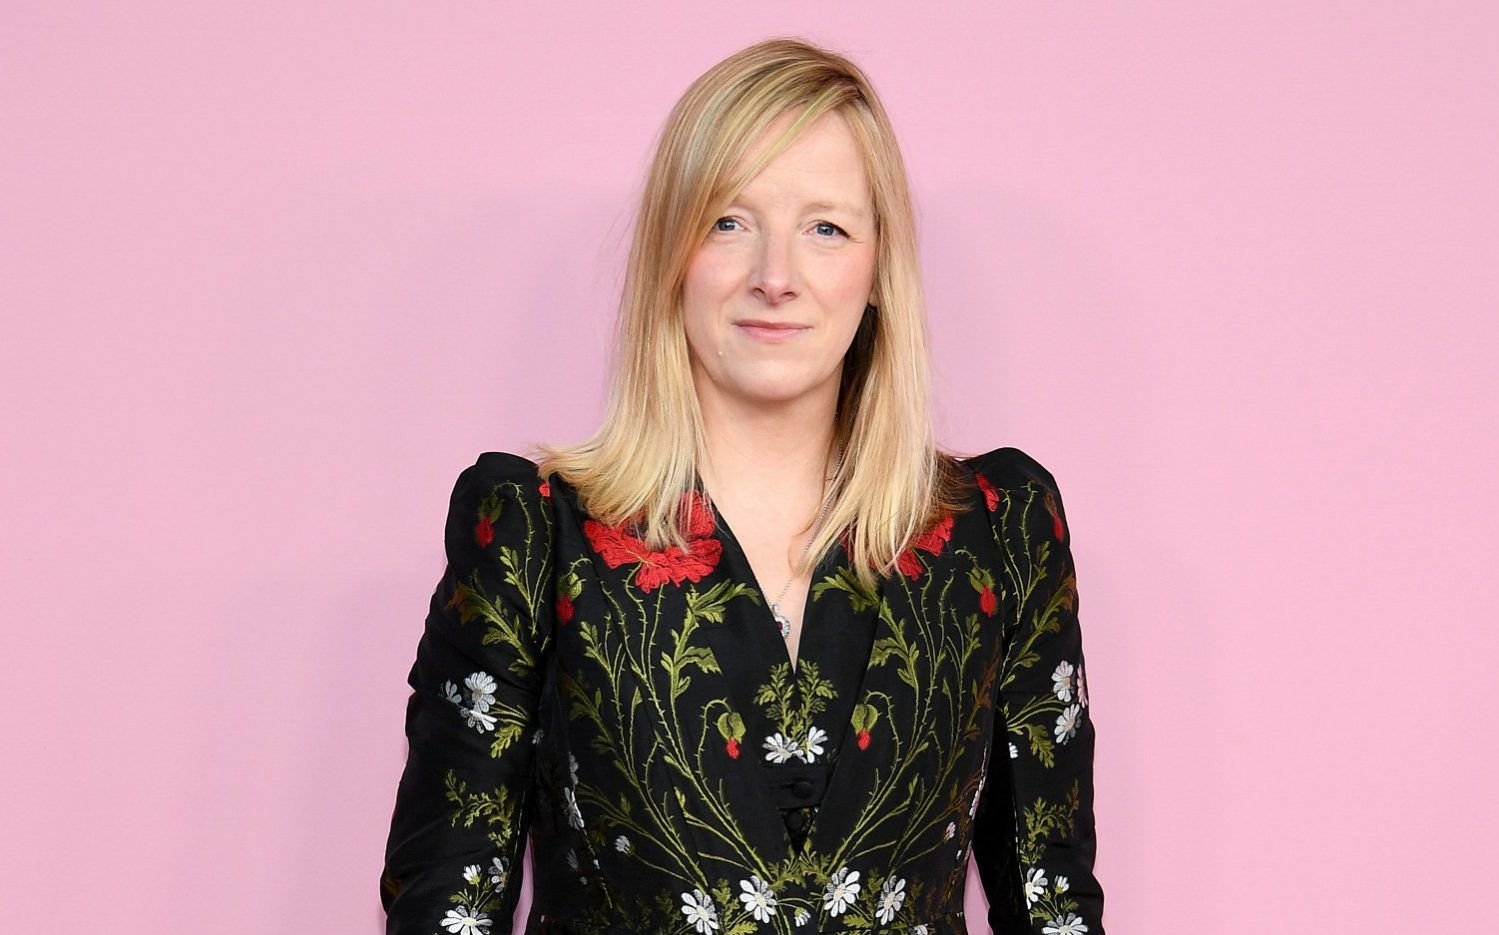 Designer Sarah Burton left Alexander McQueen after more than two decades of working together 1